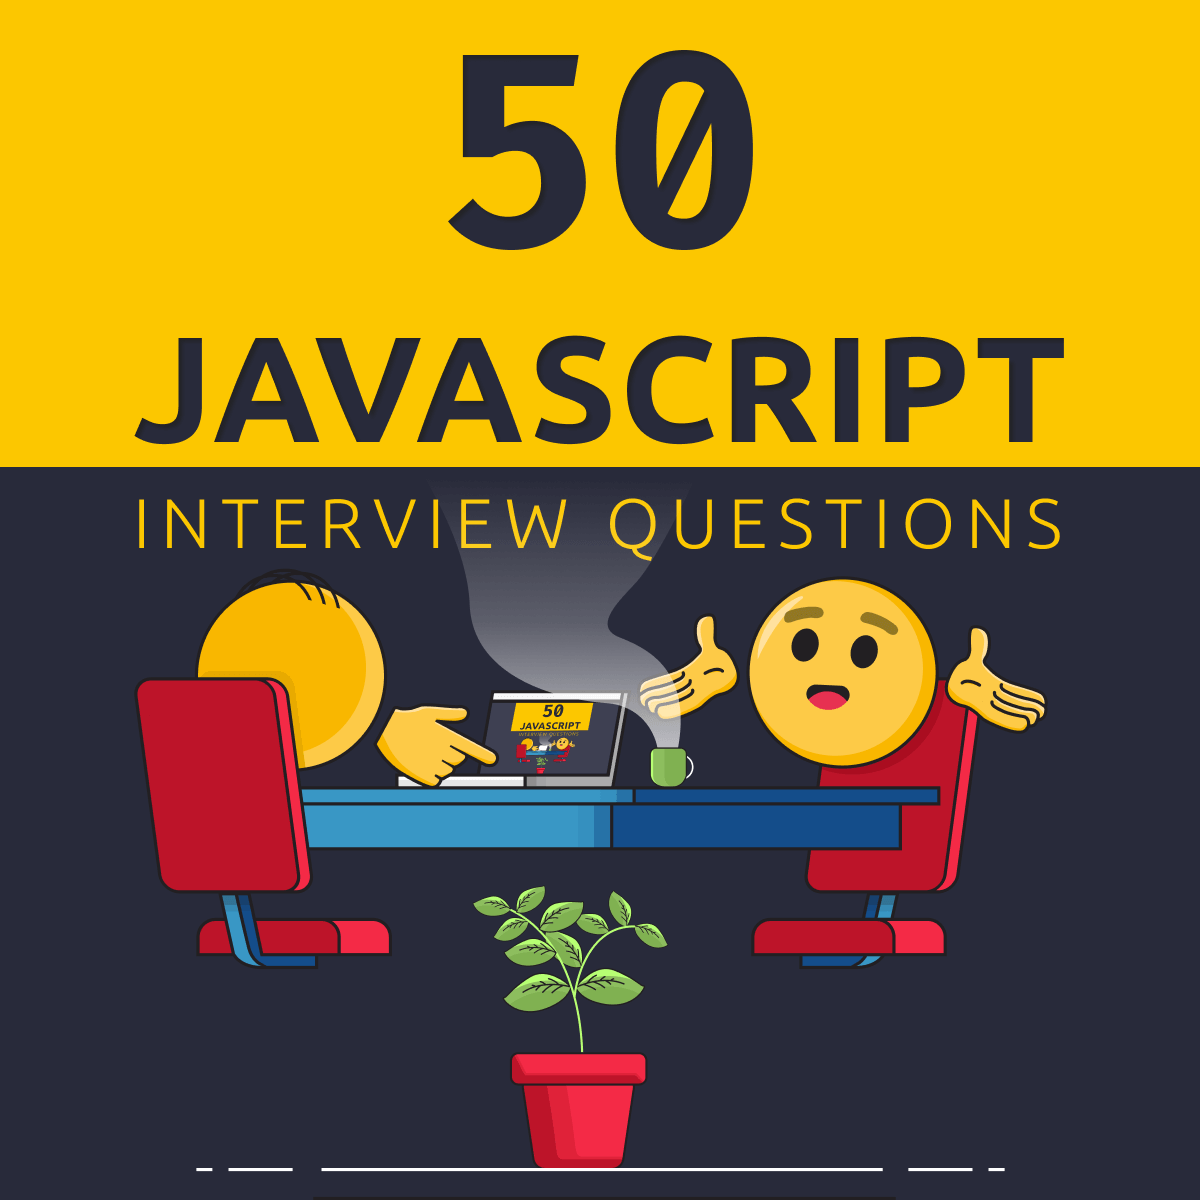 Get prepared for JavaScript interview questions